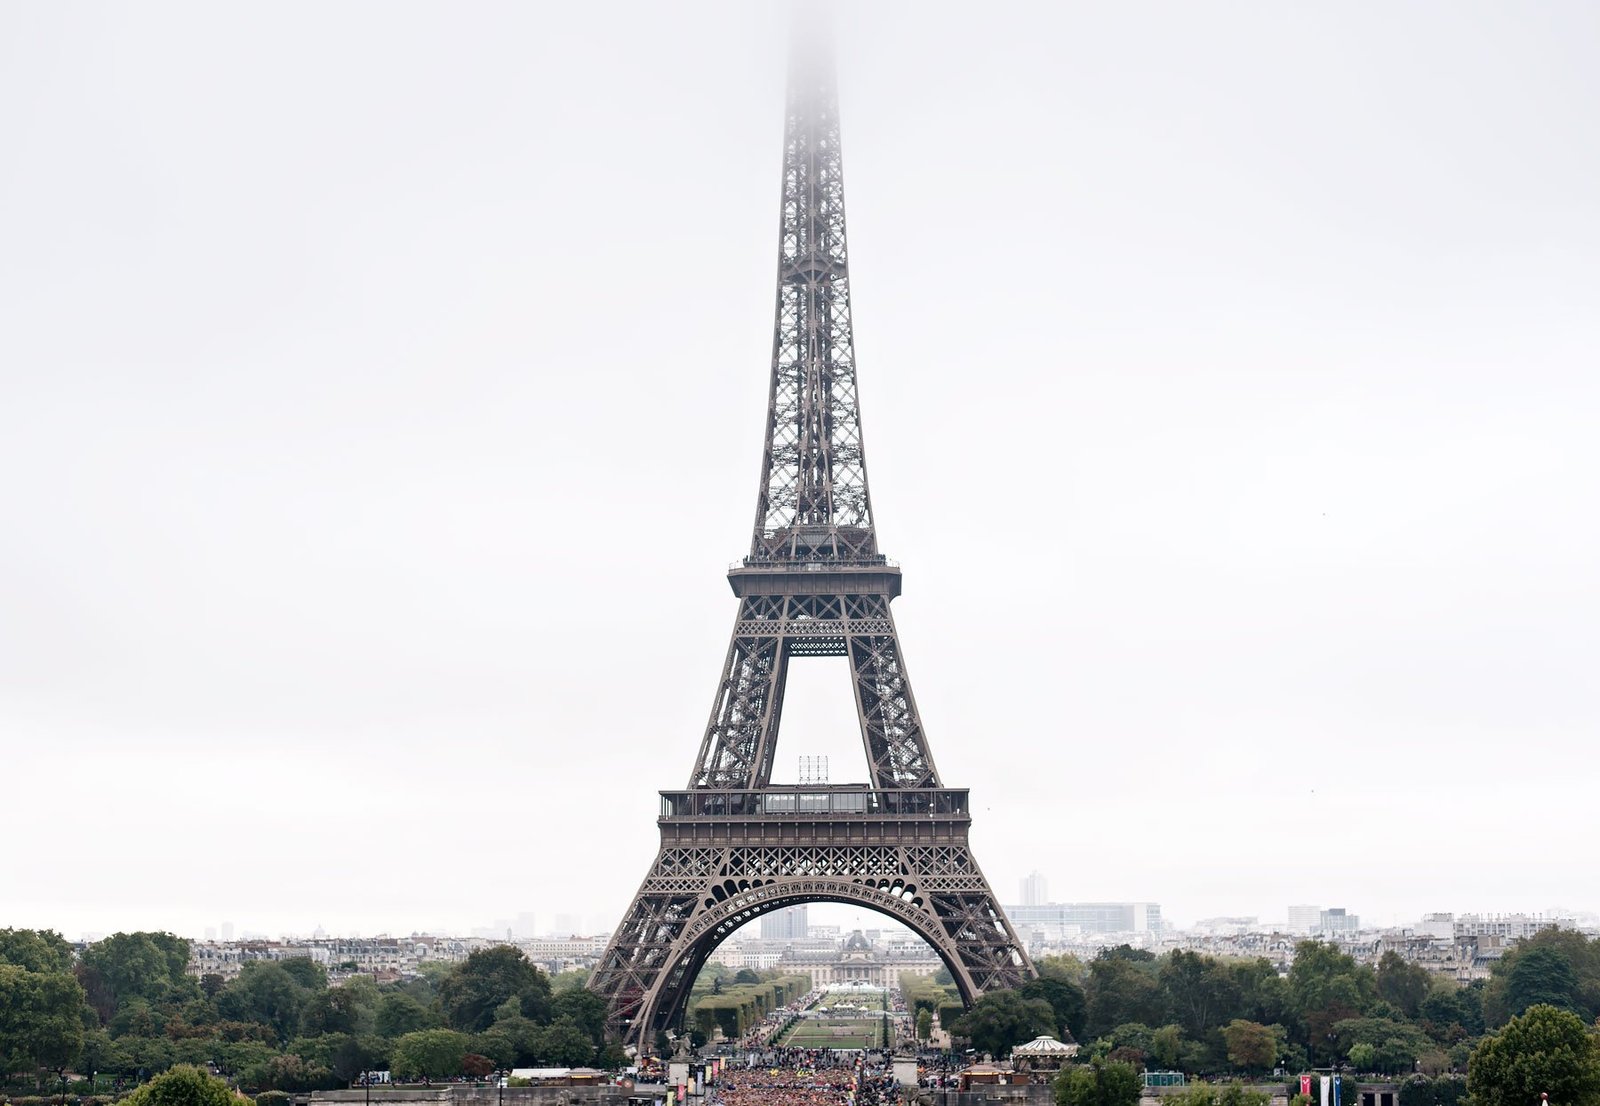 Ten amazing new places I discovered in Paris - The Eiffel Tower